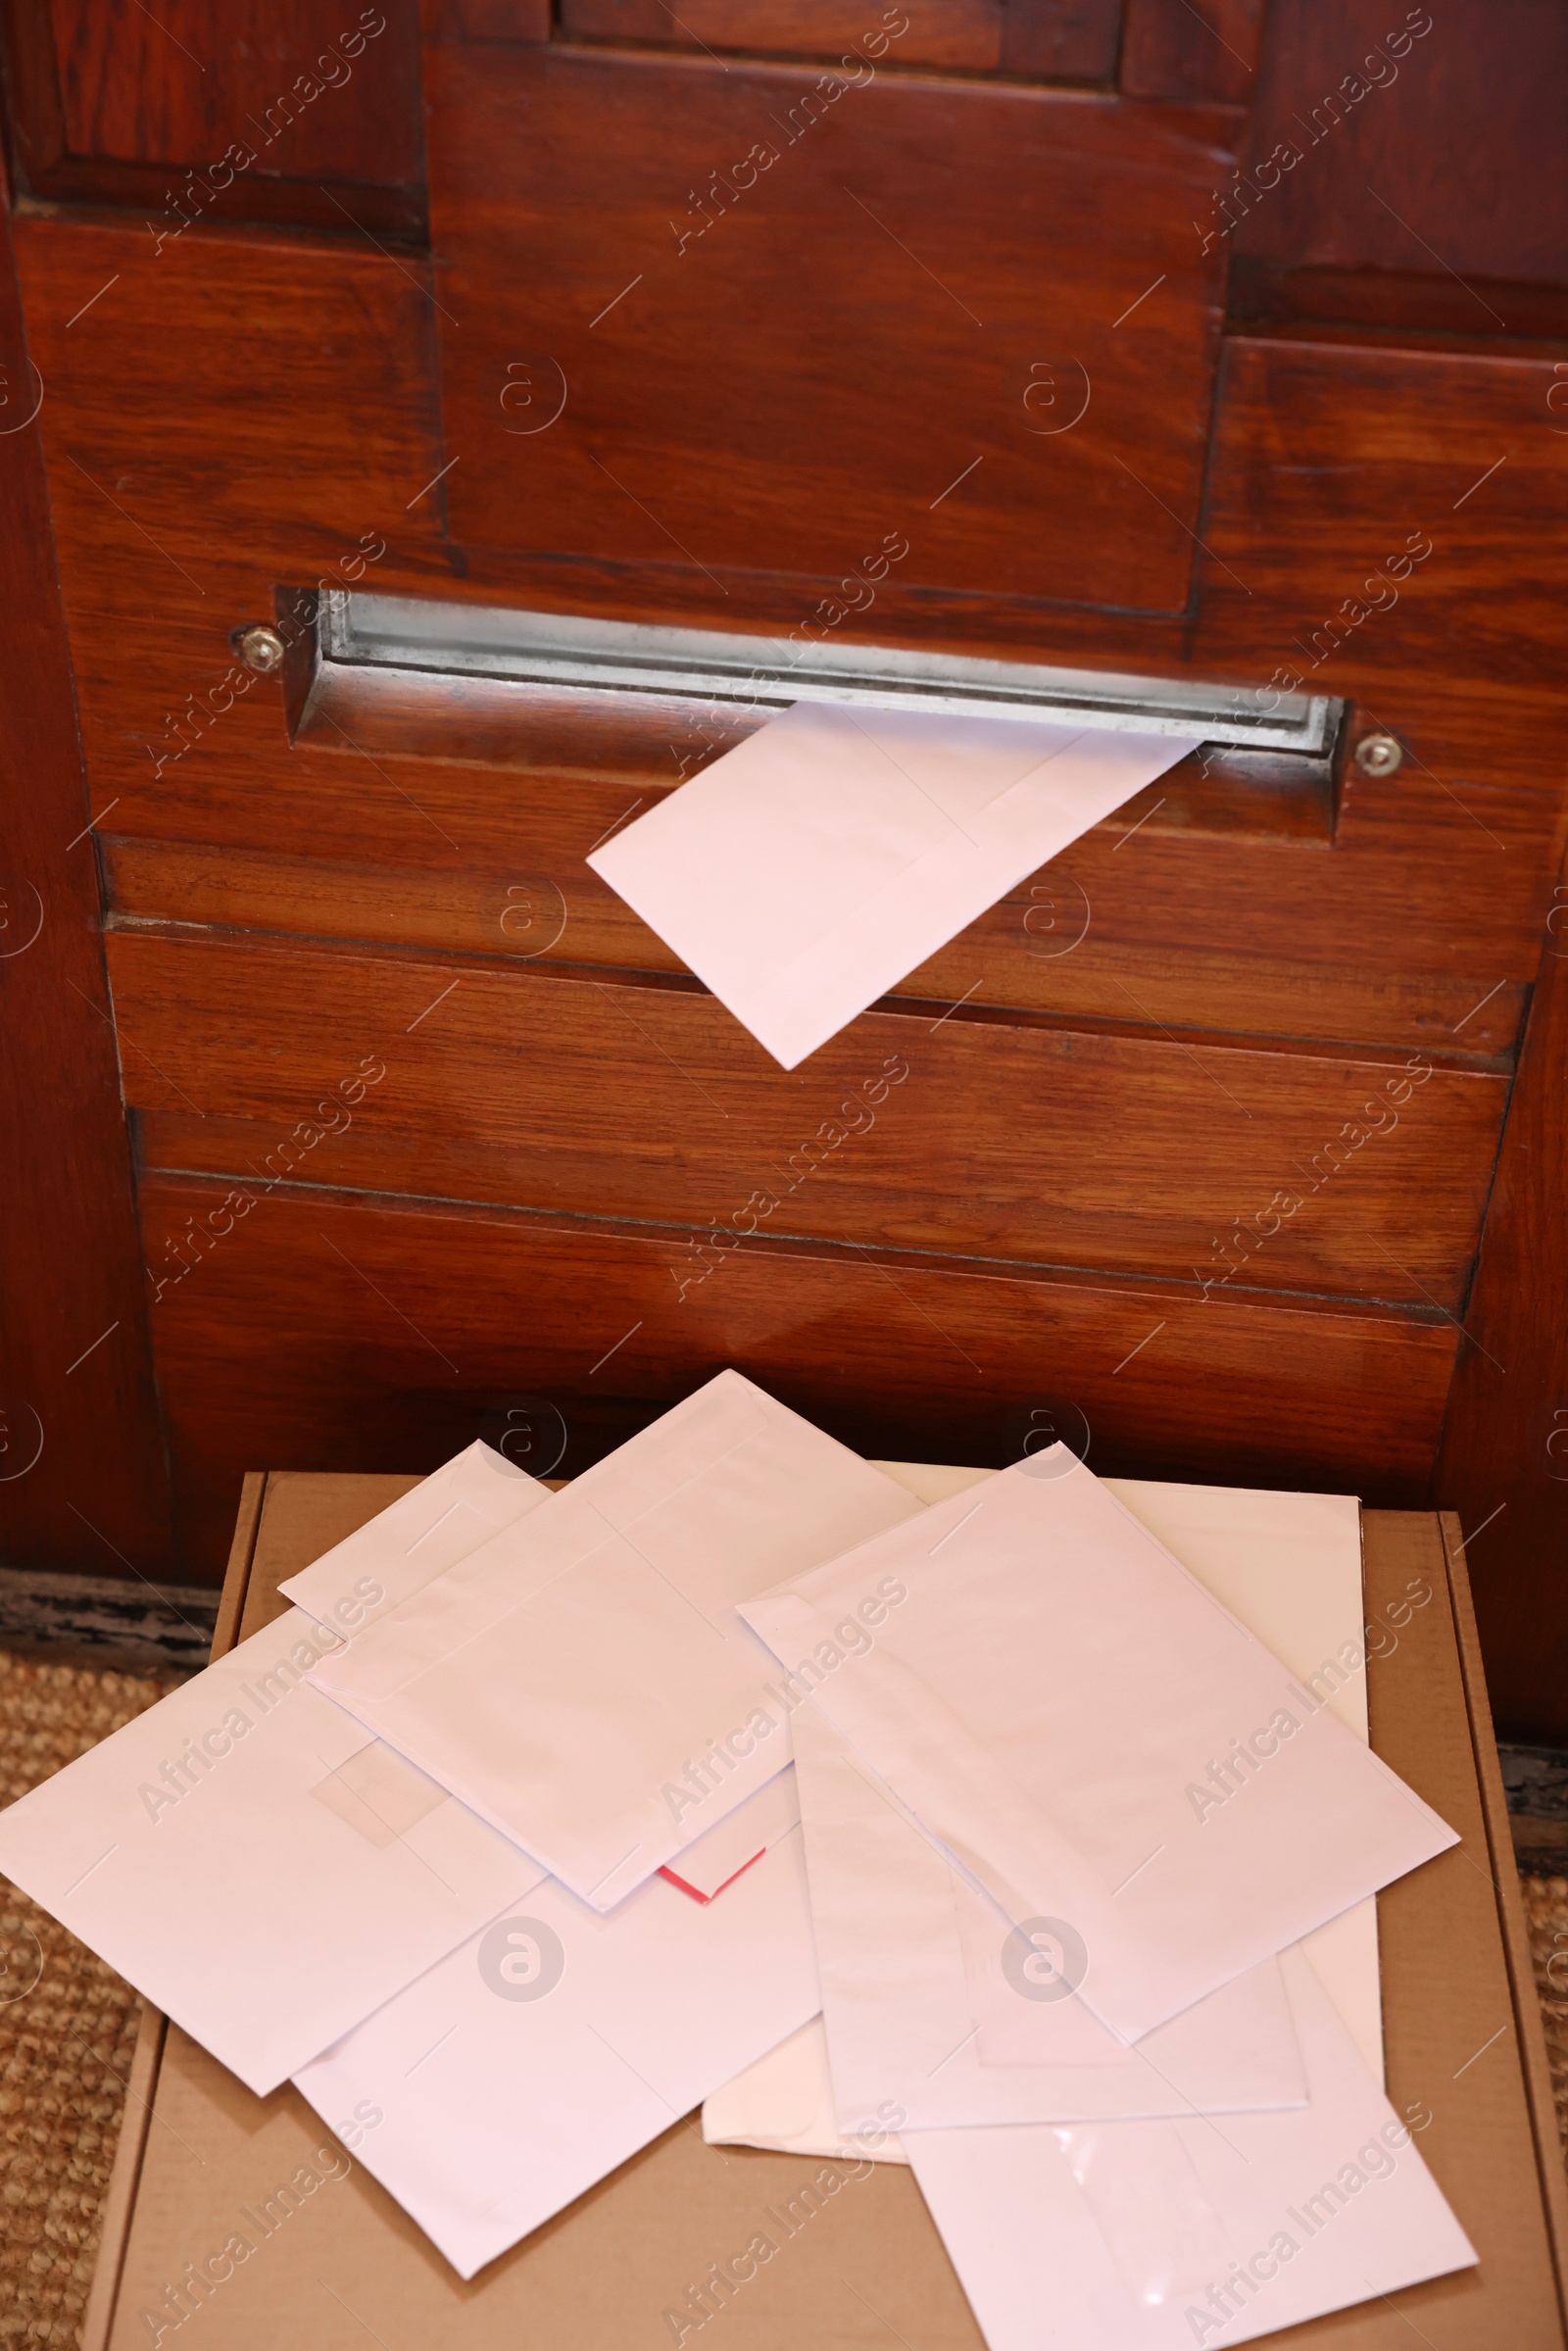 Photo of Wooden door with mail slot, many envelopes and cardboard indoors, above view